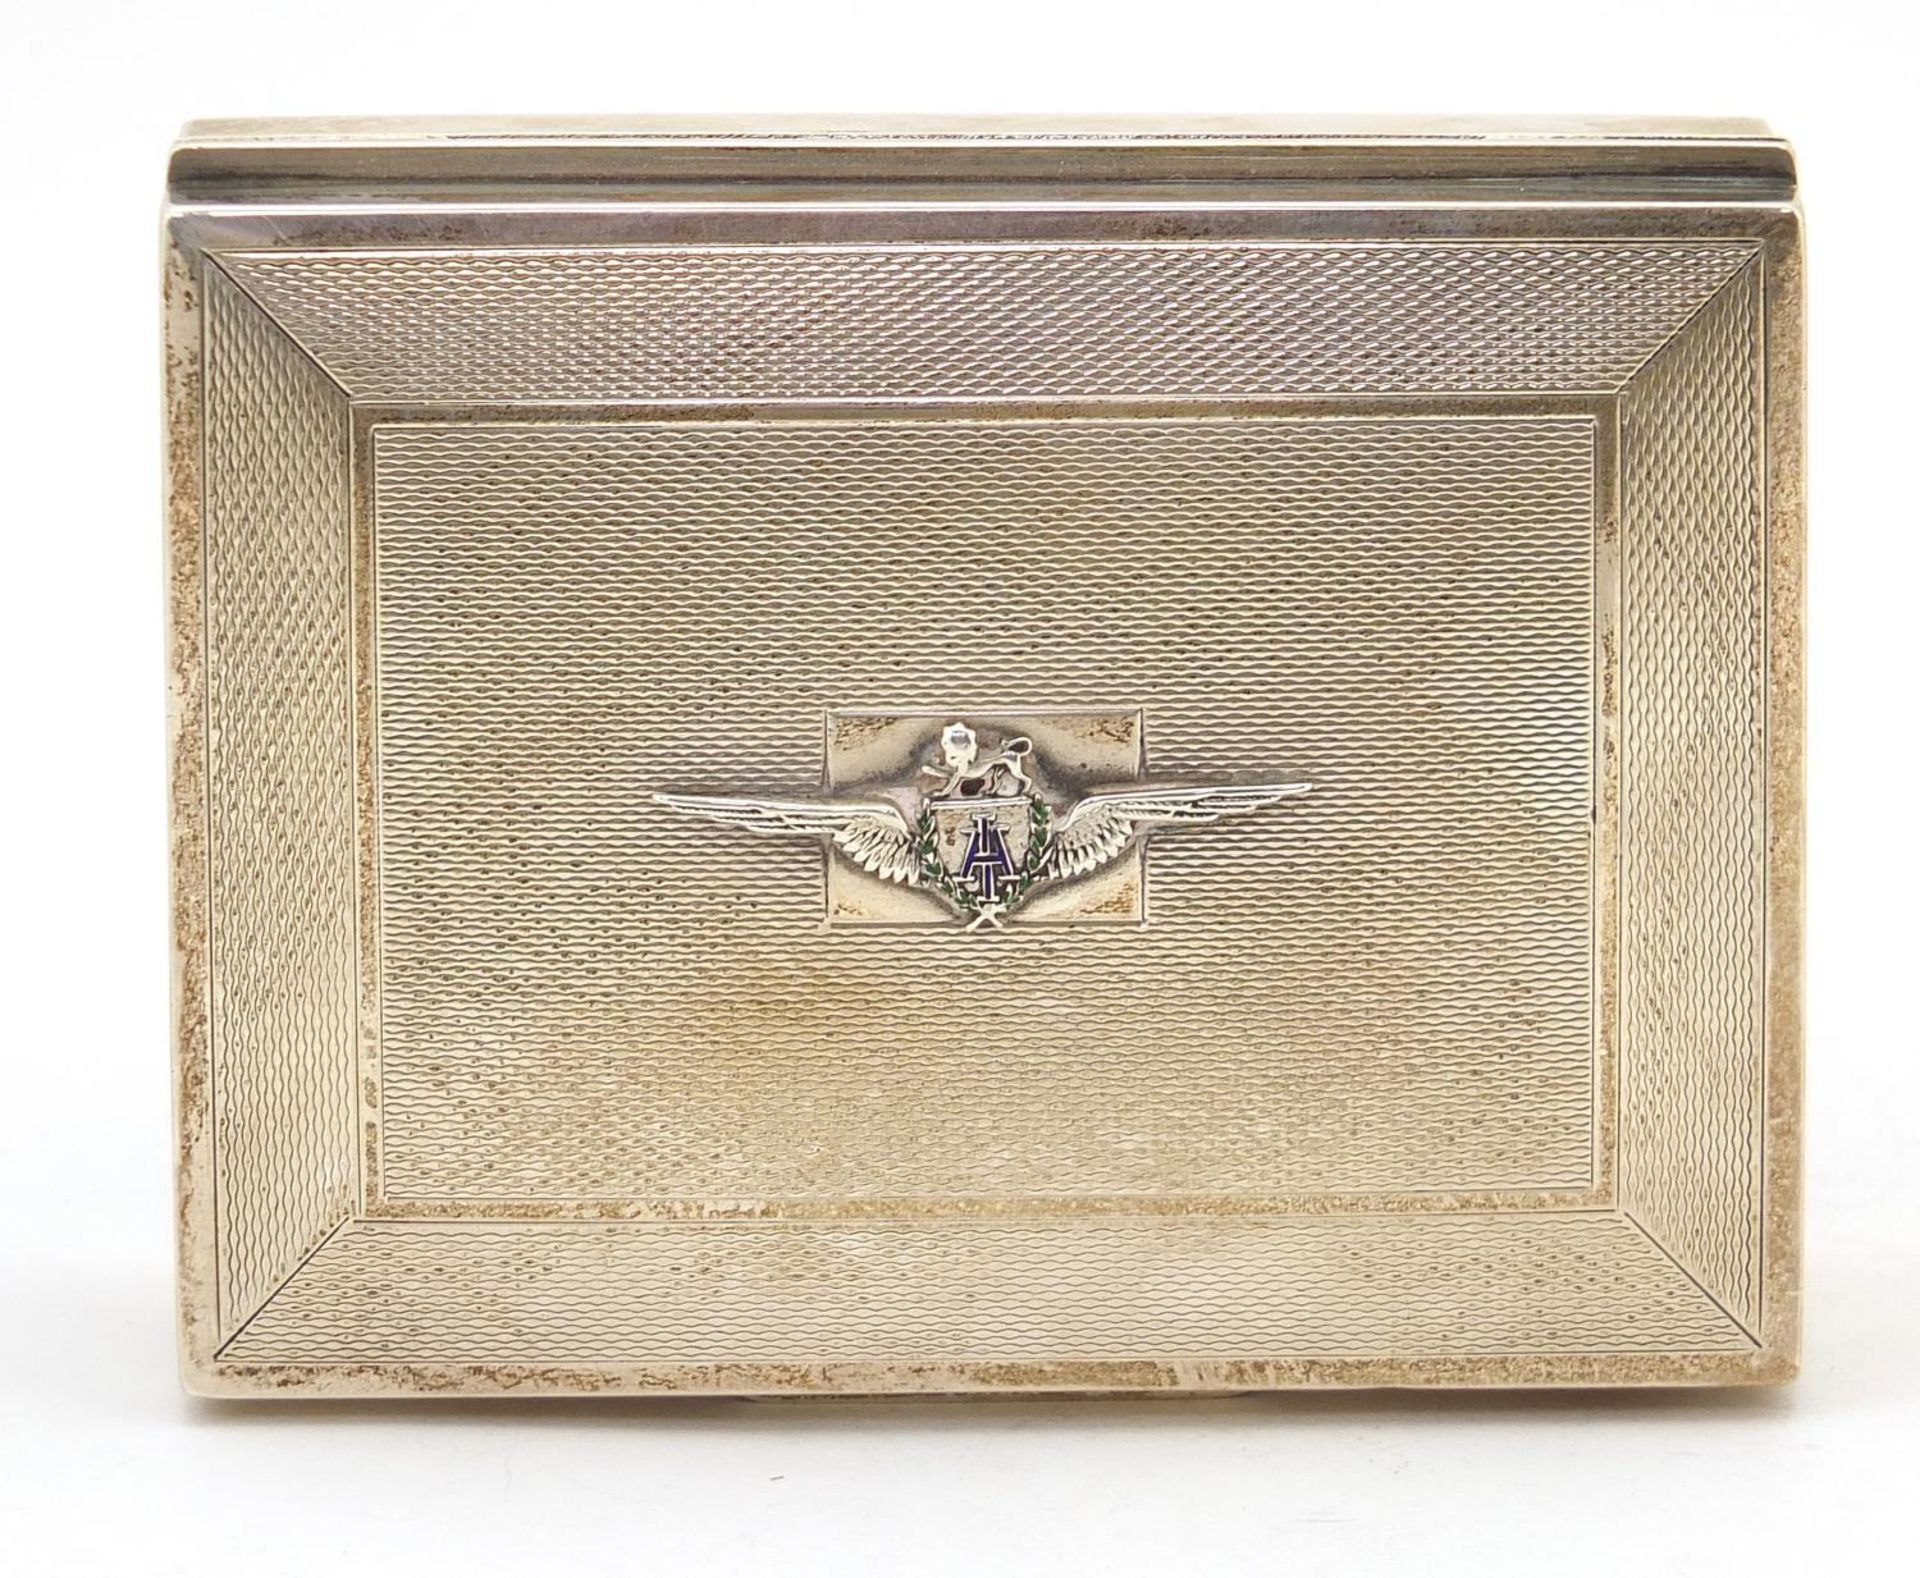 Alexander Clark & Co Ltd, rectangular silver cigarette box, the hinged lid with engine turned - Image 3 of 7